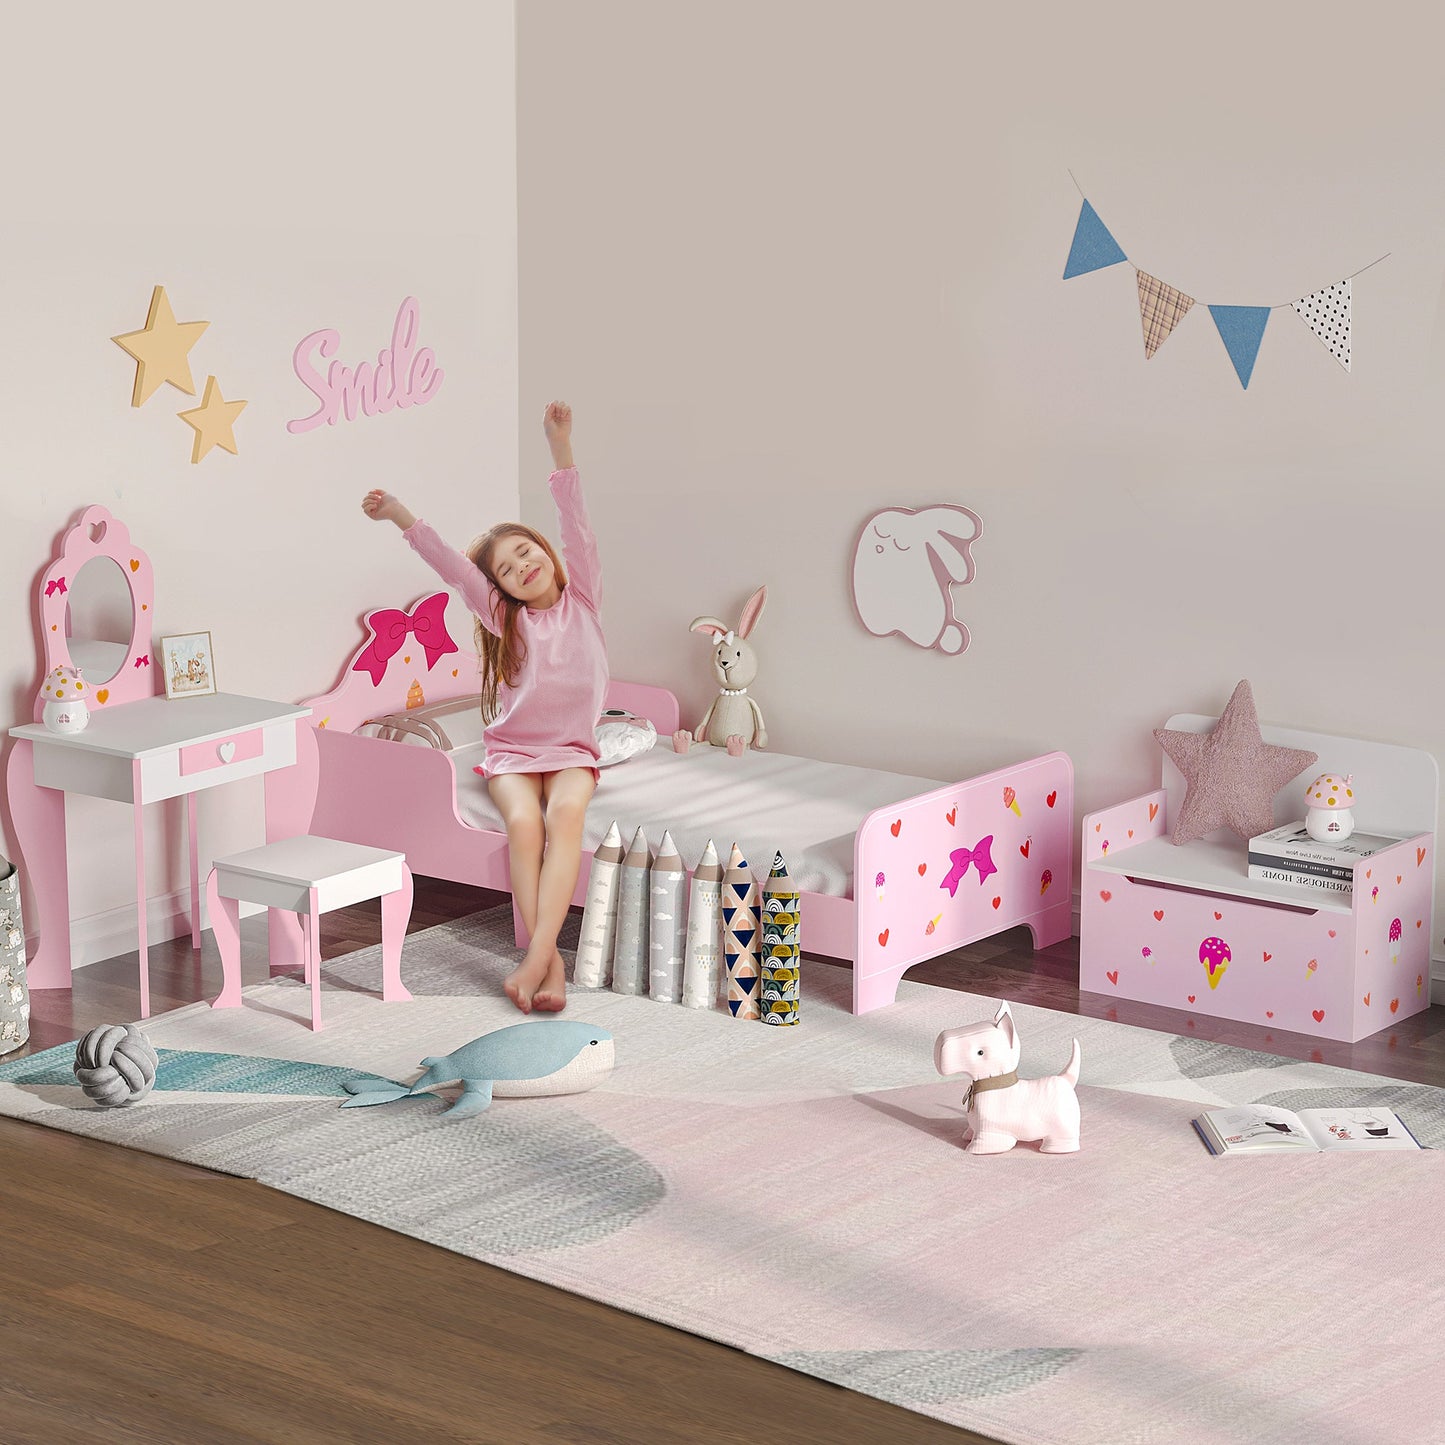 ZONEKIZ 4PCs Kids Bedroom Furniture Set with Bed, Toy Box Bench, Dressing Table and Stool, Princess Themed, for 3-6 Years Old, Pink